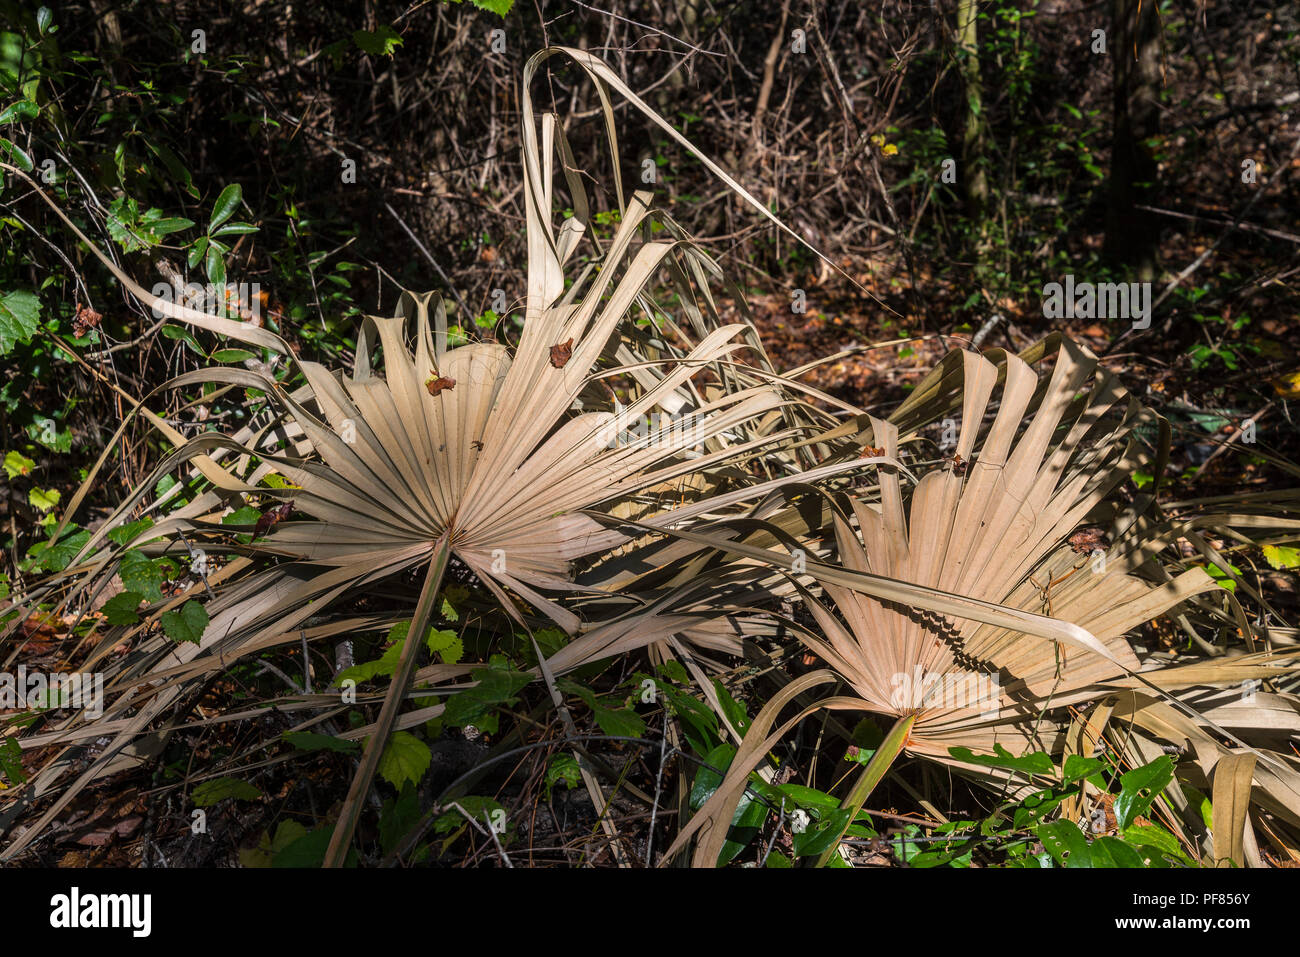 Dead palm fronds sit among debris on North Florida forest floor. Stock Photo